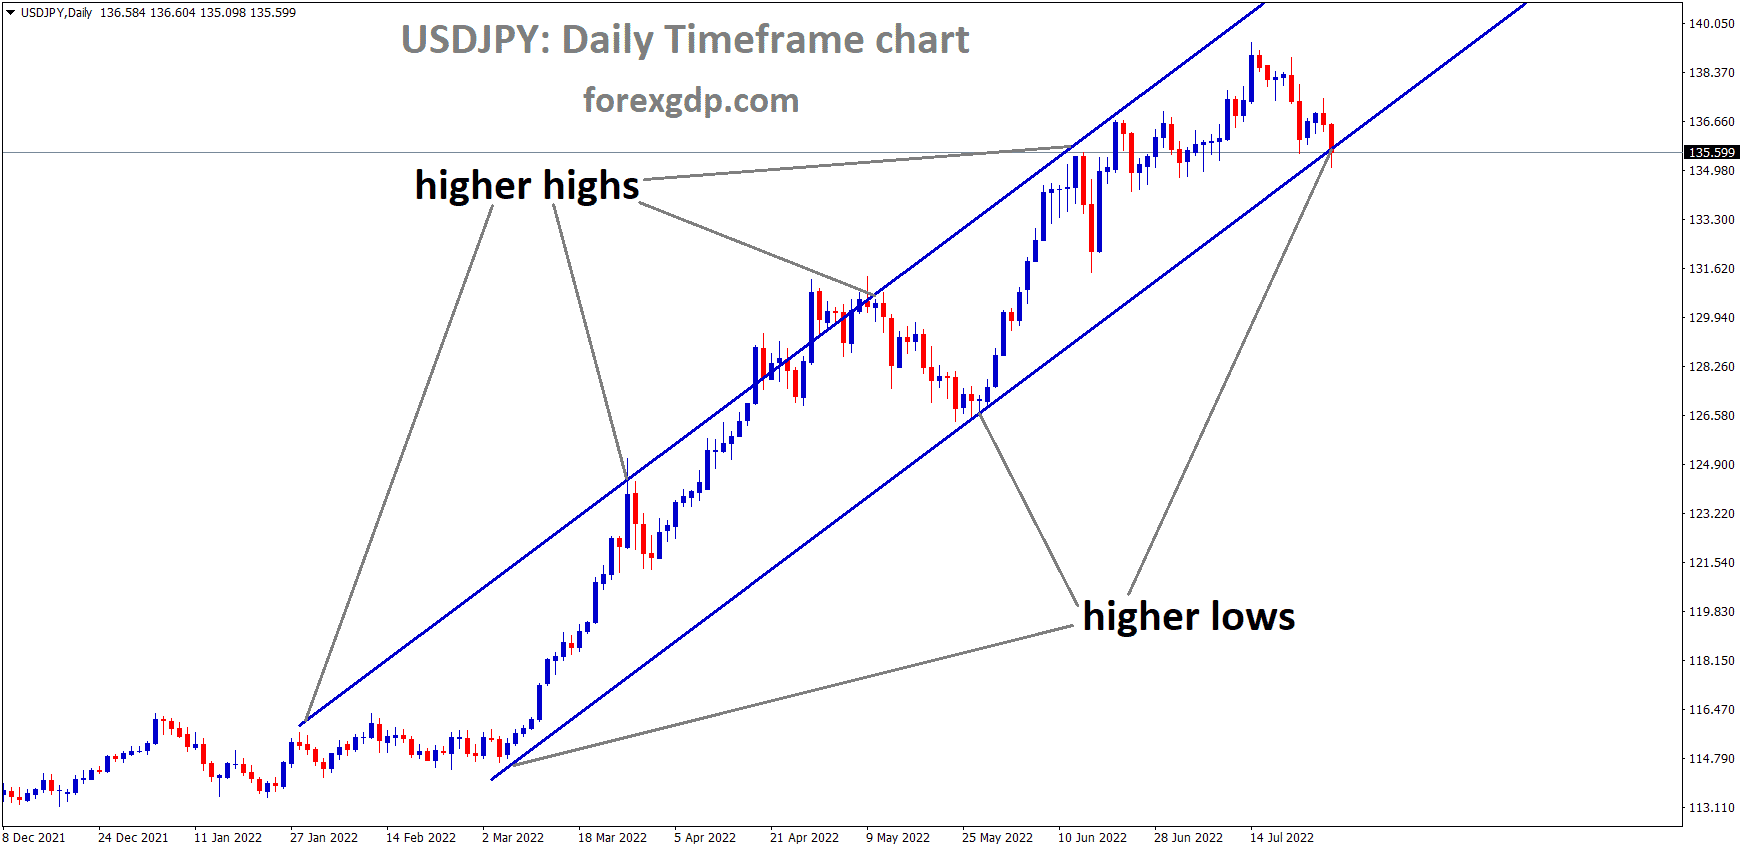 USDJPY Daily TF analysis Market is moving in an Ascending channel and the Market has reached the higher low area of the channel